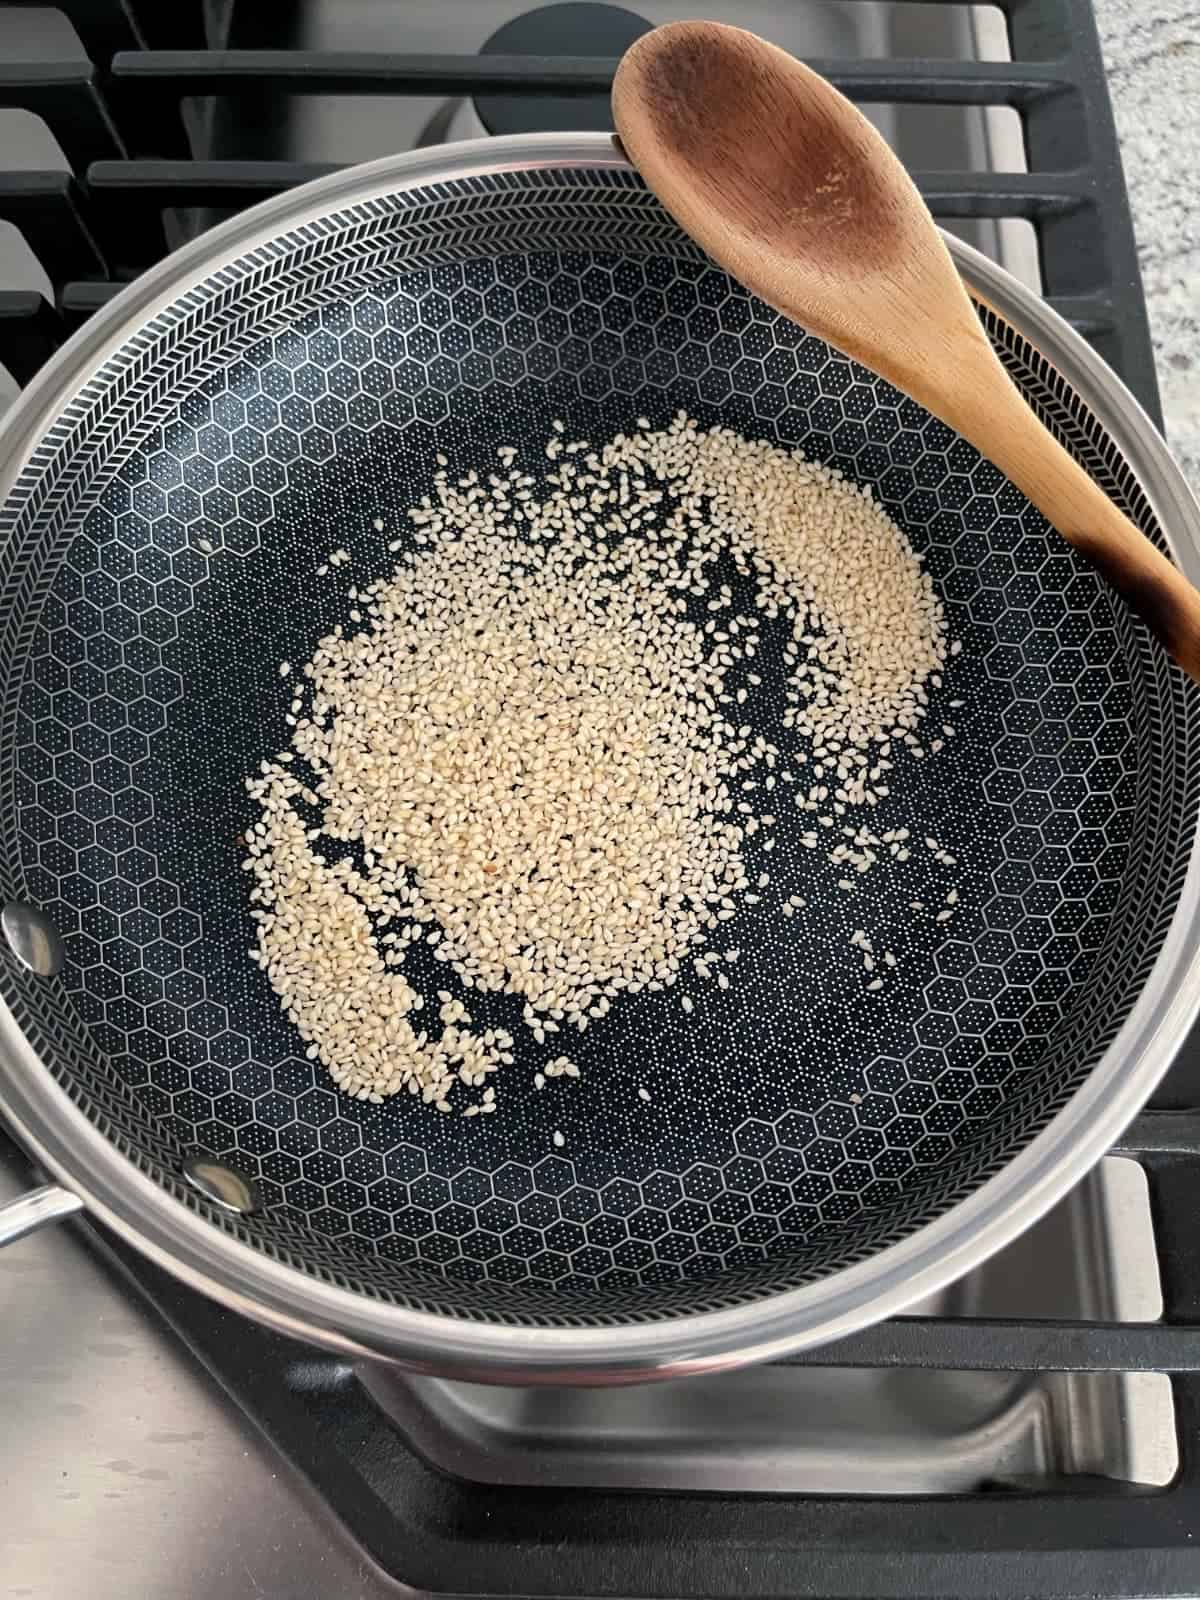 Toasting sesame seeds in small skillet on stovetop.